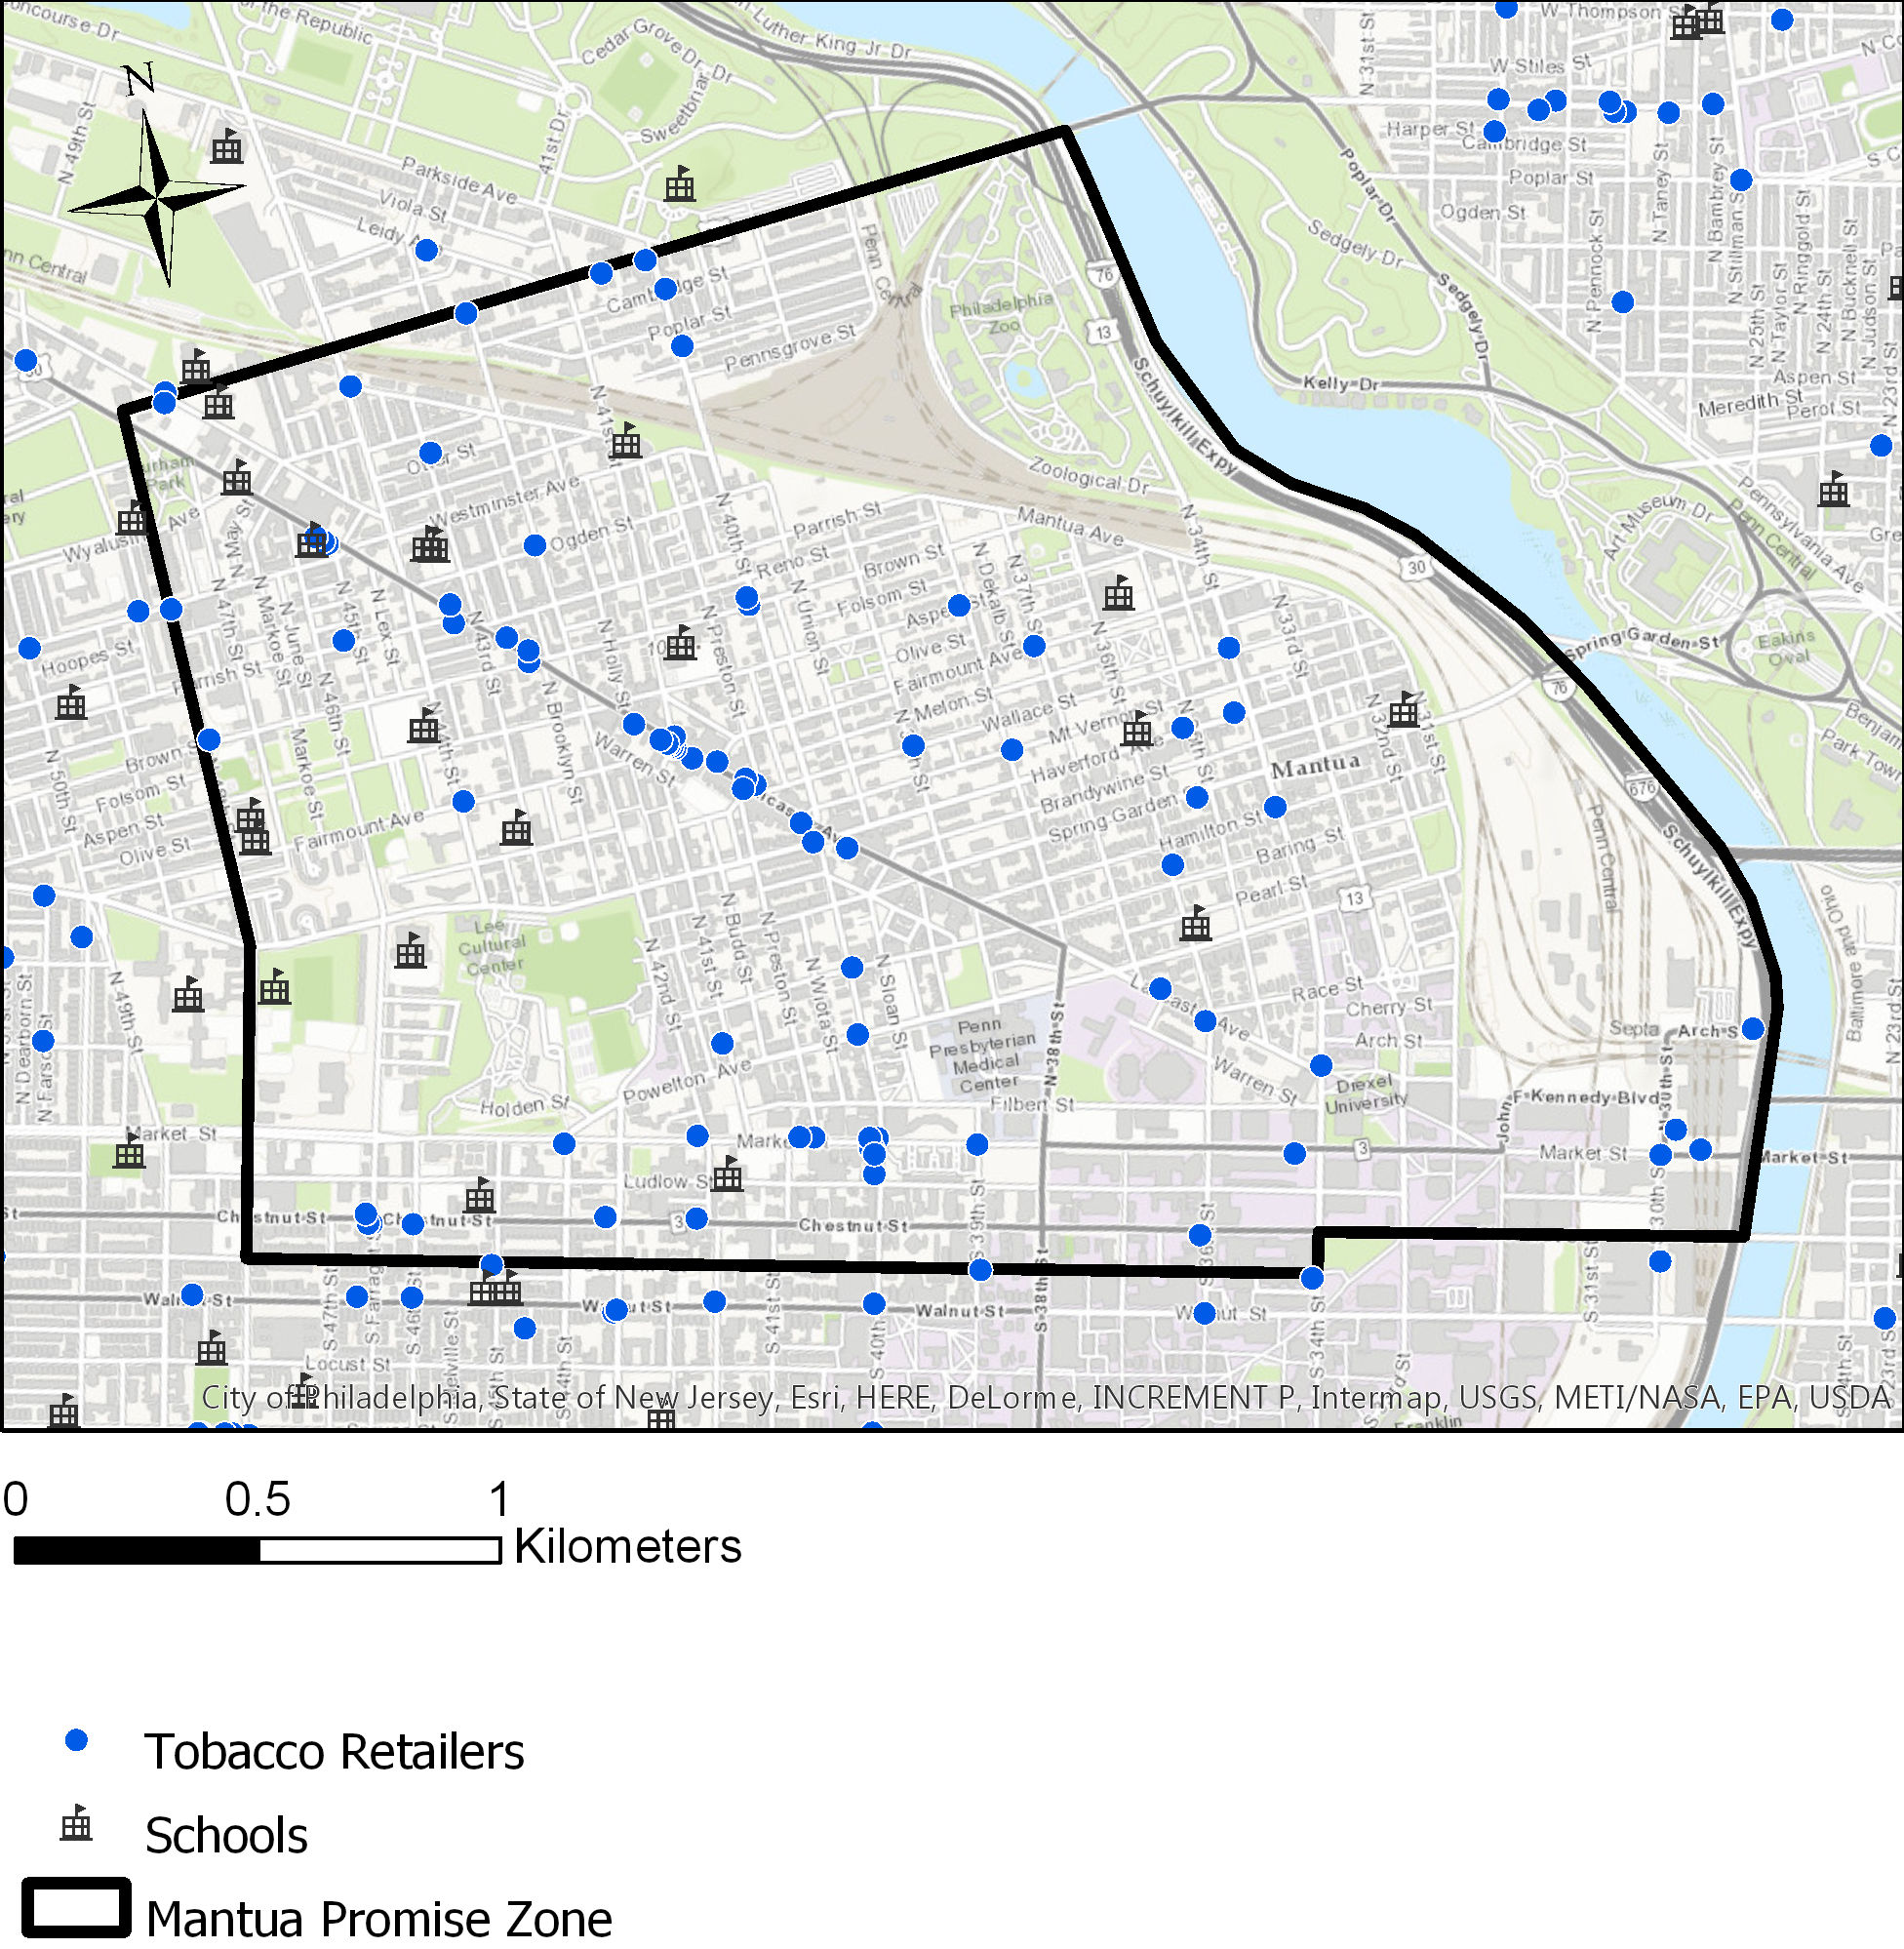 West Philadelphia Promise Zone - map with number of tobacco retailers in proximity to schools